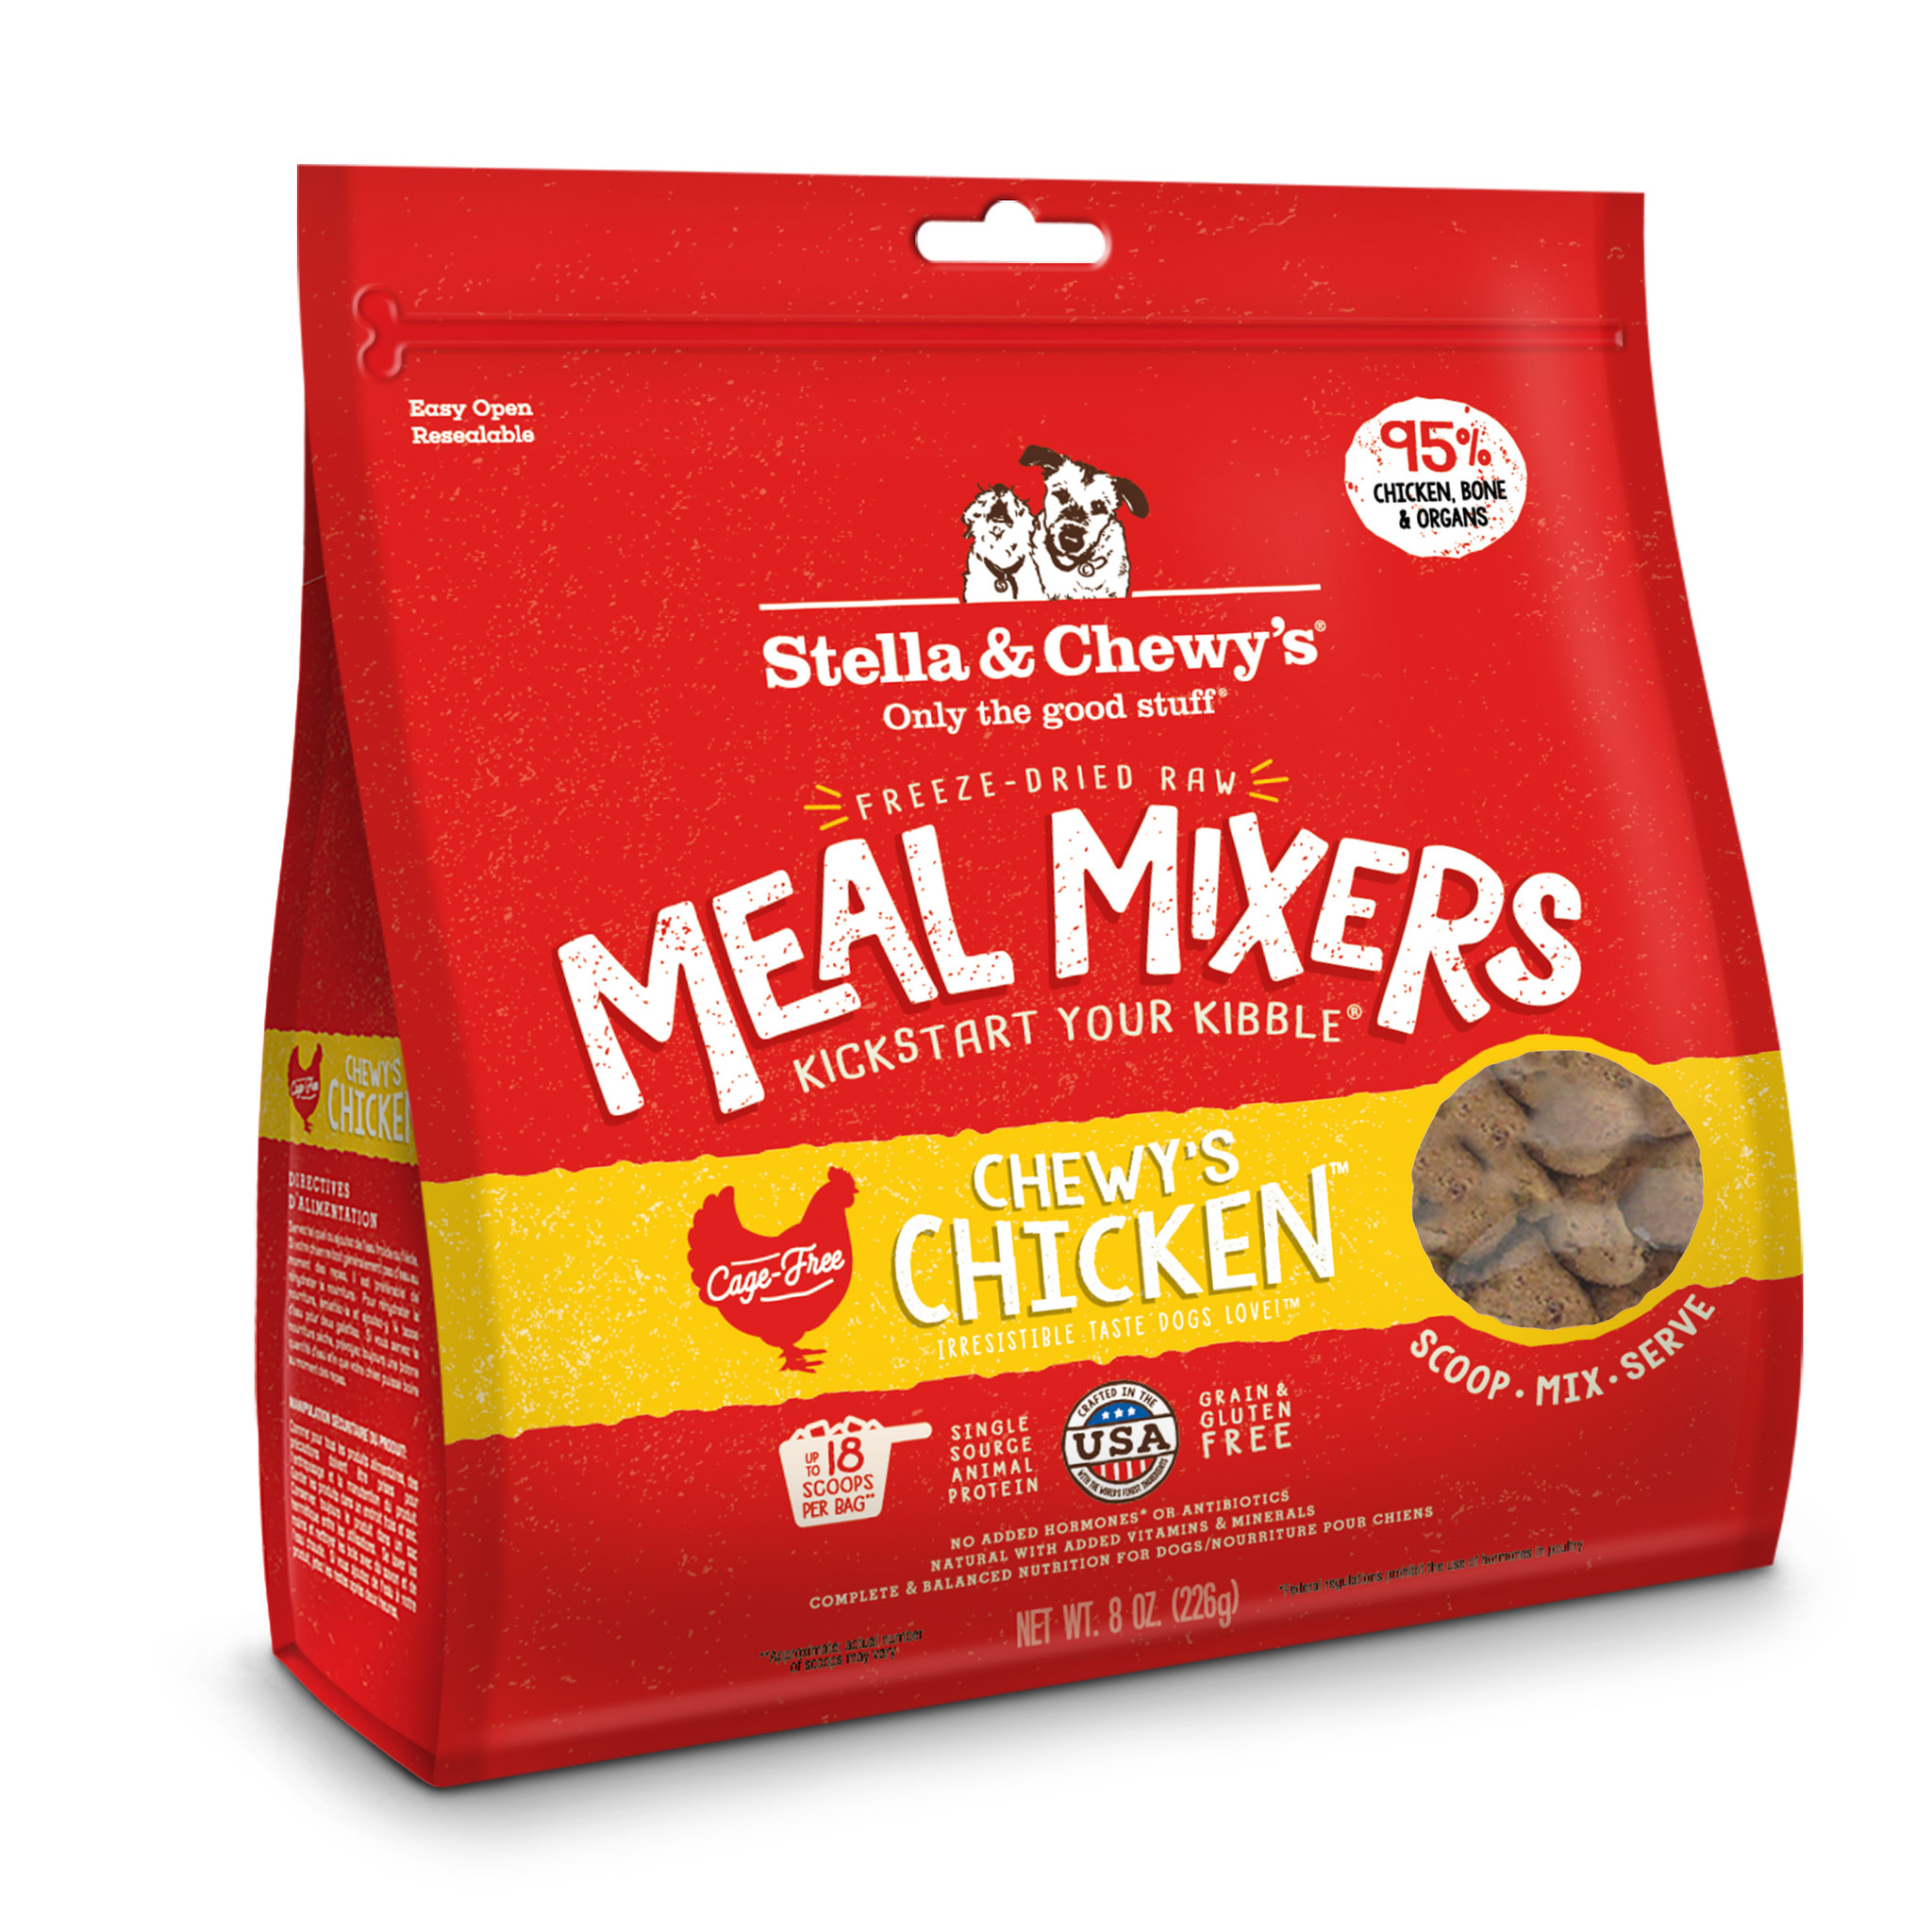 Stella & Chewys Stella & Chewys Chewy's Chicken Meal Mixer